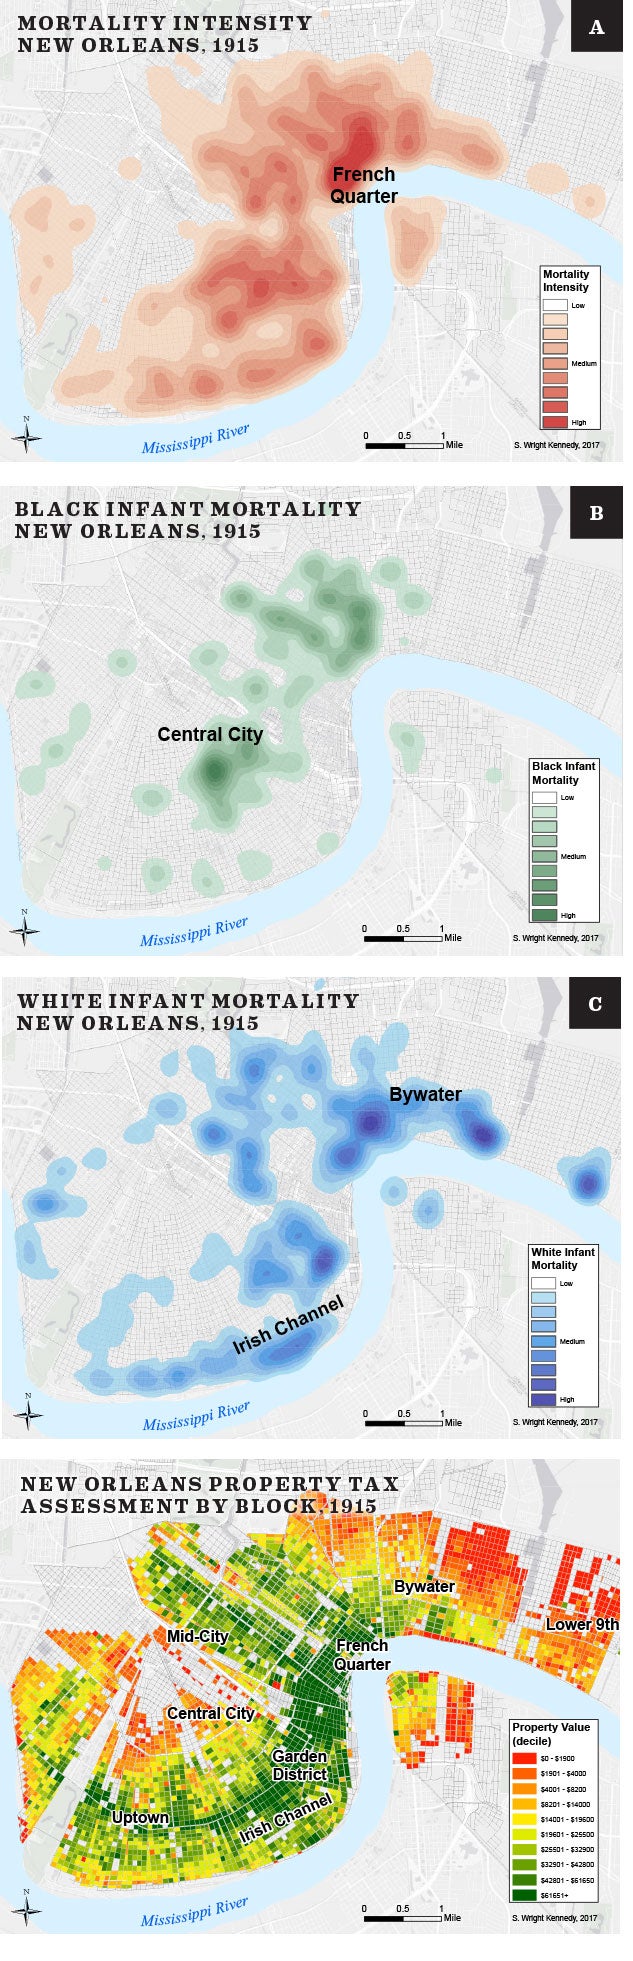 Kennedy’s maps reveal that neighborhoods in New Orleans with lower property values had disproportionately higher incidents of mortality. In 1915, the densely settled French Quarter had the highest levels of overall mortality (Map A), but both black and white infant mortality, while spatially separated, aligned with areas of lower land values. Black residents of the Central City neighborhood, an area that bordered swampland only a decade earlier, grappled with high levels of infant mortality in 1915 (Map B). Italian and Irish immigrants living in the Bywater and Irish Channel neighborhoods, respectively (Map C), suffered through high levels of infant mortality as well. Compared to the infant mortality patterns of earlier years, by 1915 infant mortality unequally affected lower-income neighborhoods, both black and white.